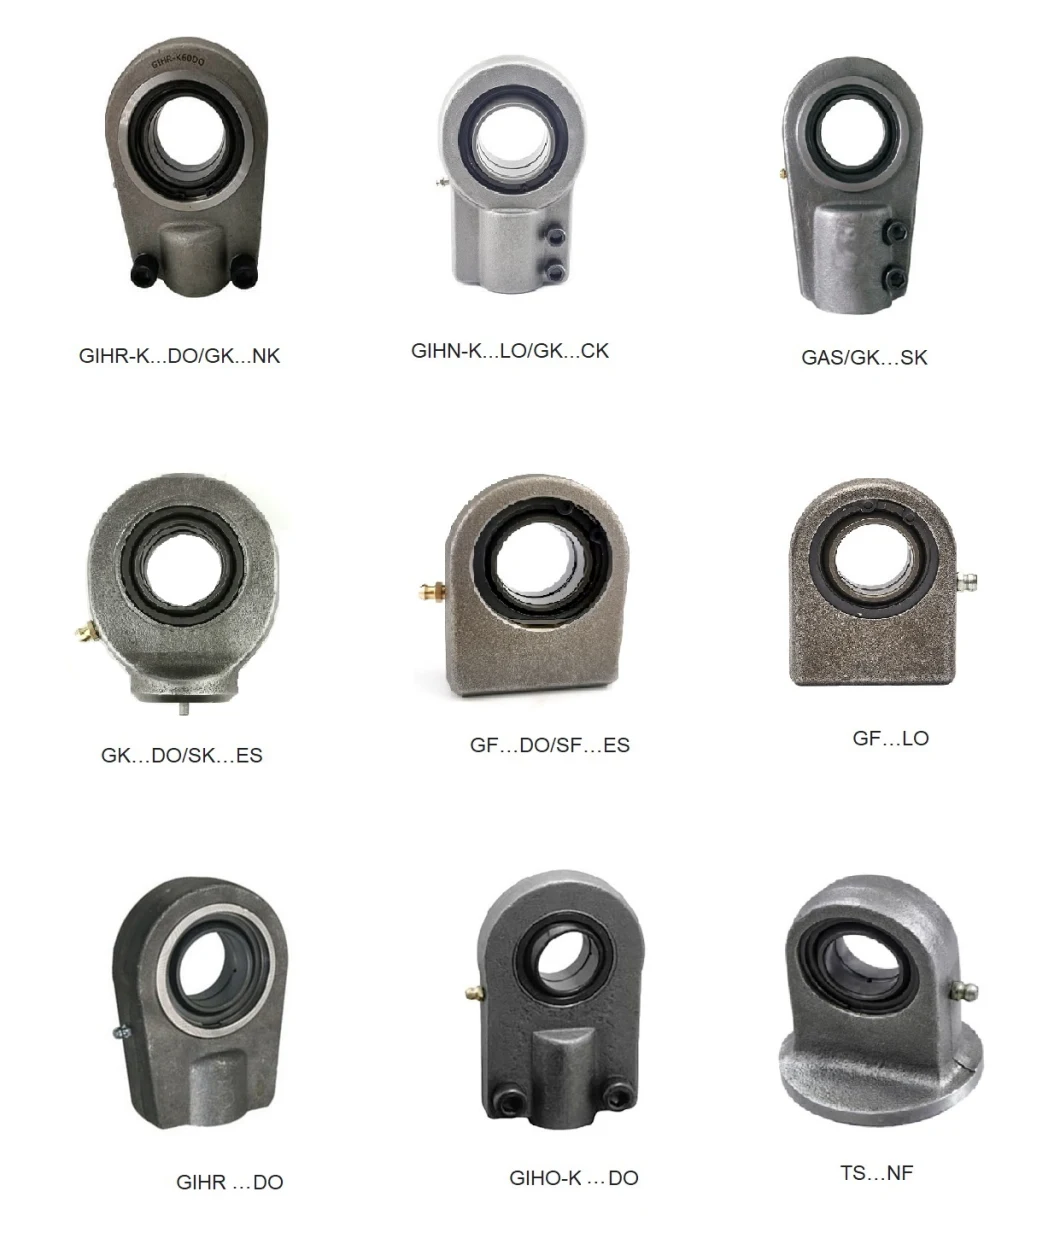 TS...NF Series Hydraulic Rod Ends Bearings For Hydraulic Cylinders (TS20NF TS25NF TS30NF TS35NF TS40NF TS50NF TS60NF)